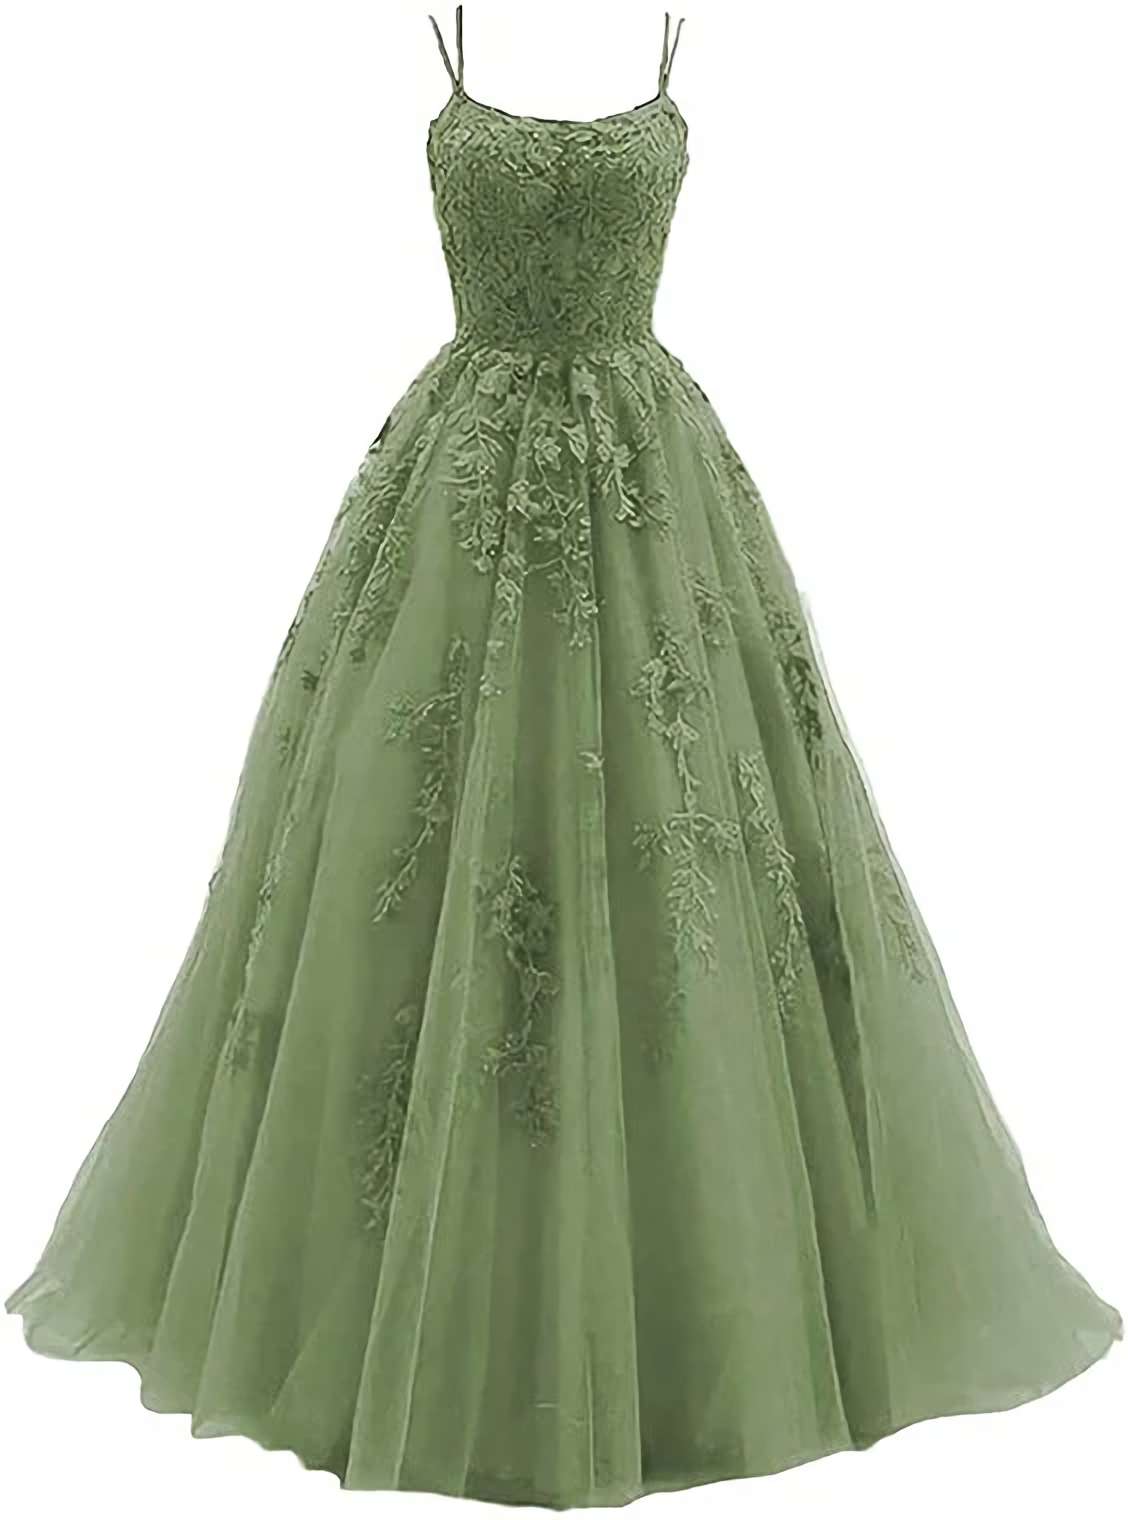 Green Lace Applique Tulle Long Straps Cross Back Long Party Dress, Green Junior Corset Prom Dress outfits, Formal Dress Fashion